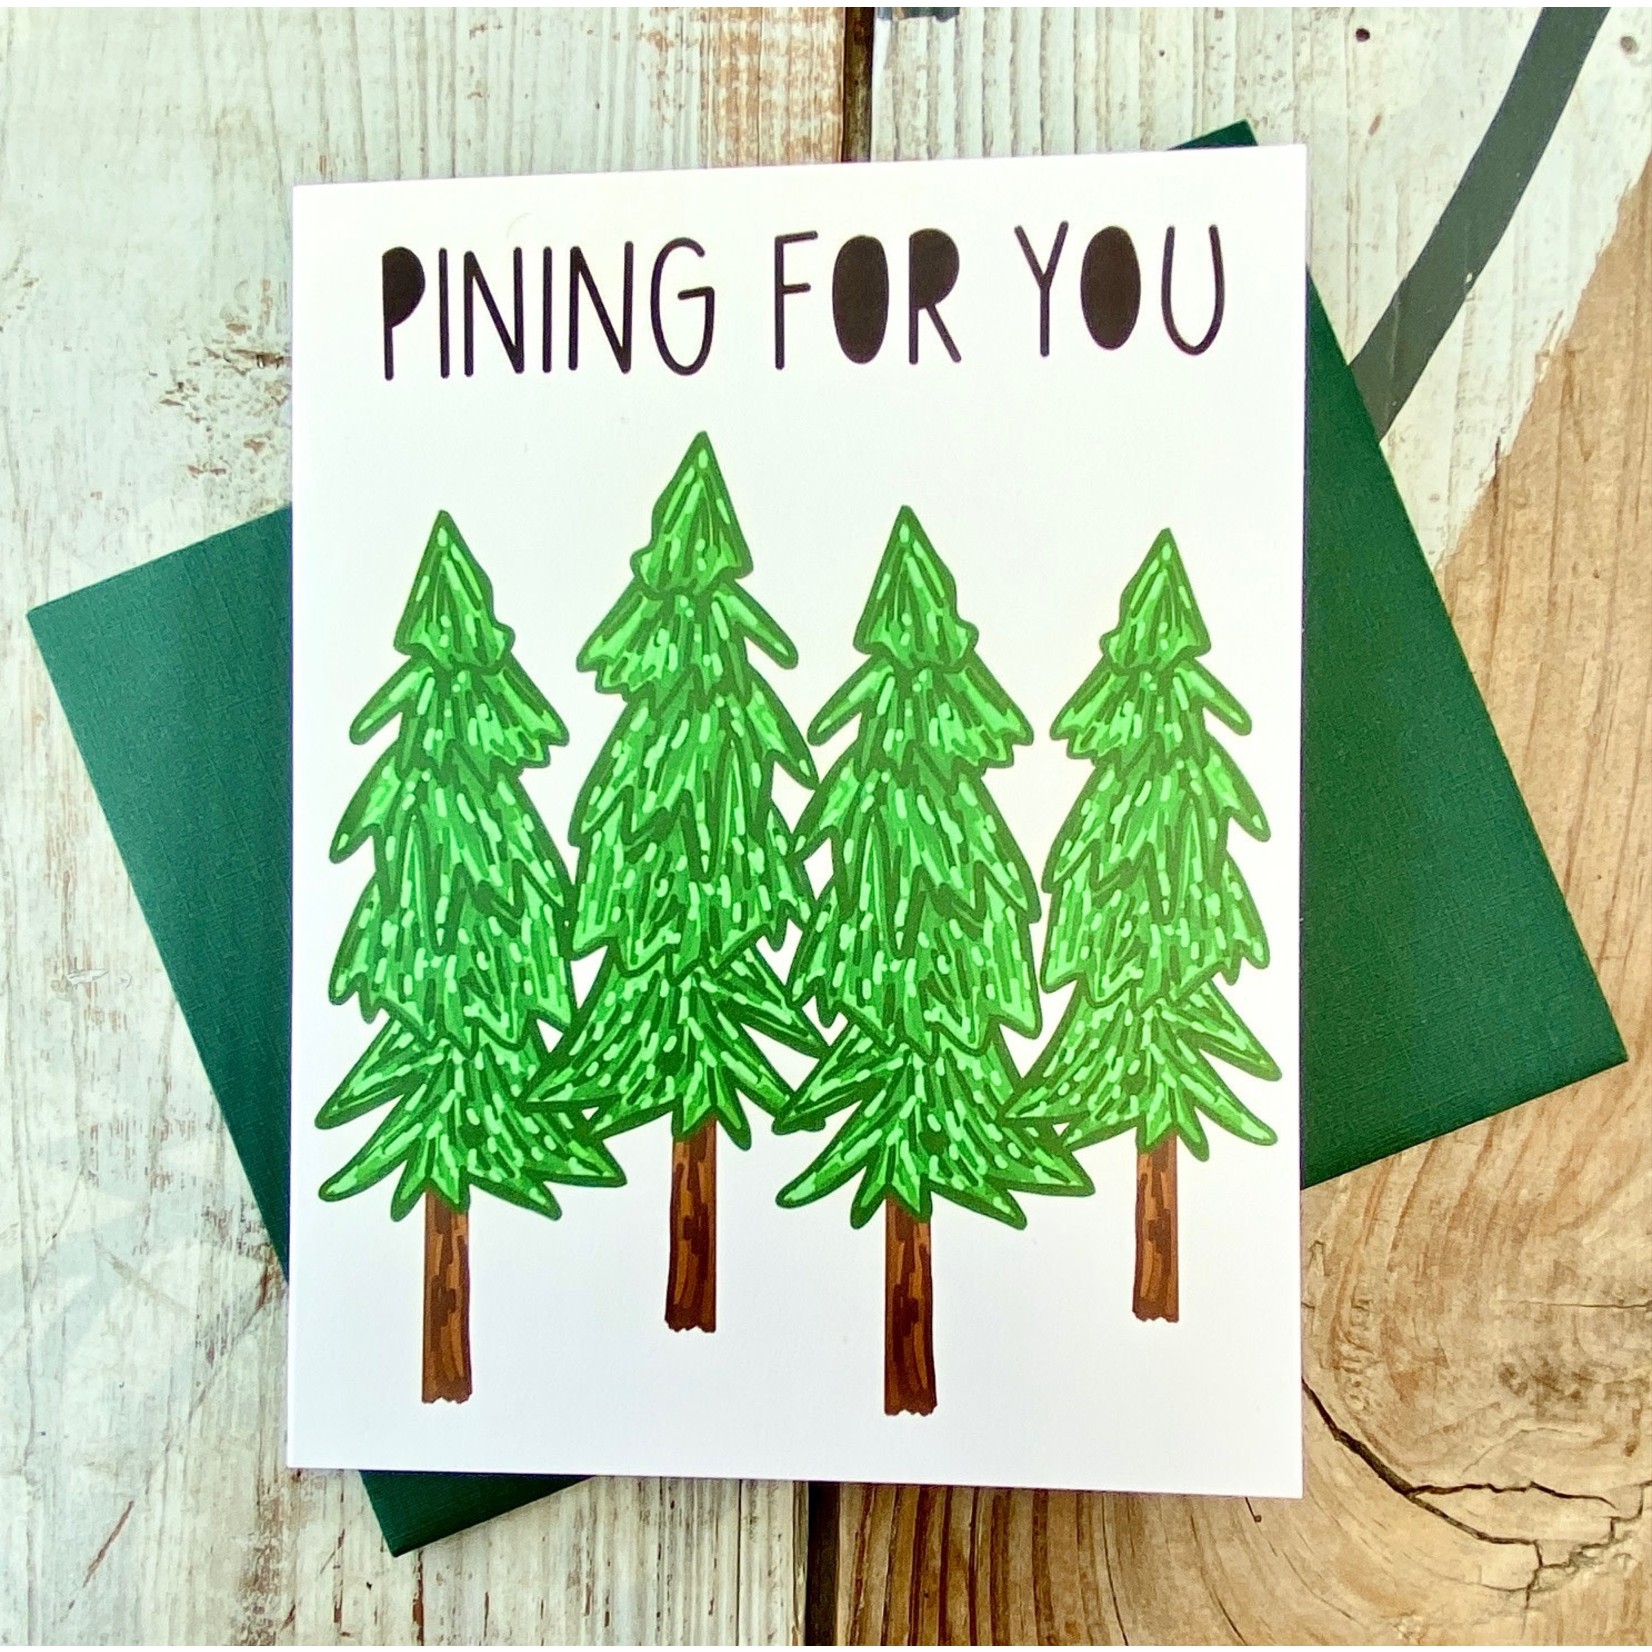 Fiber and Gloss Pining For You Trees Greeting Card